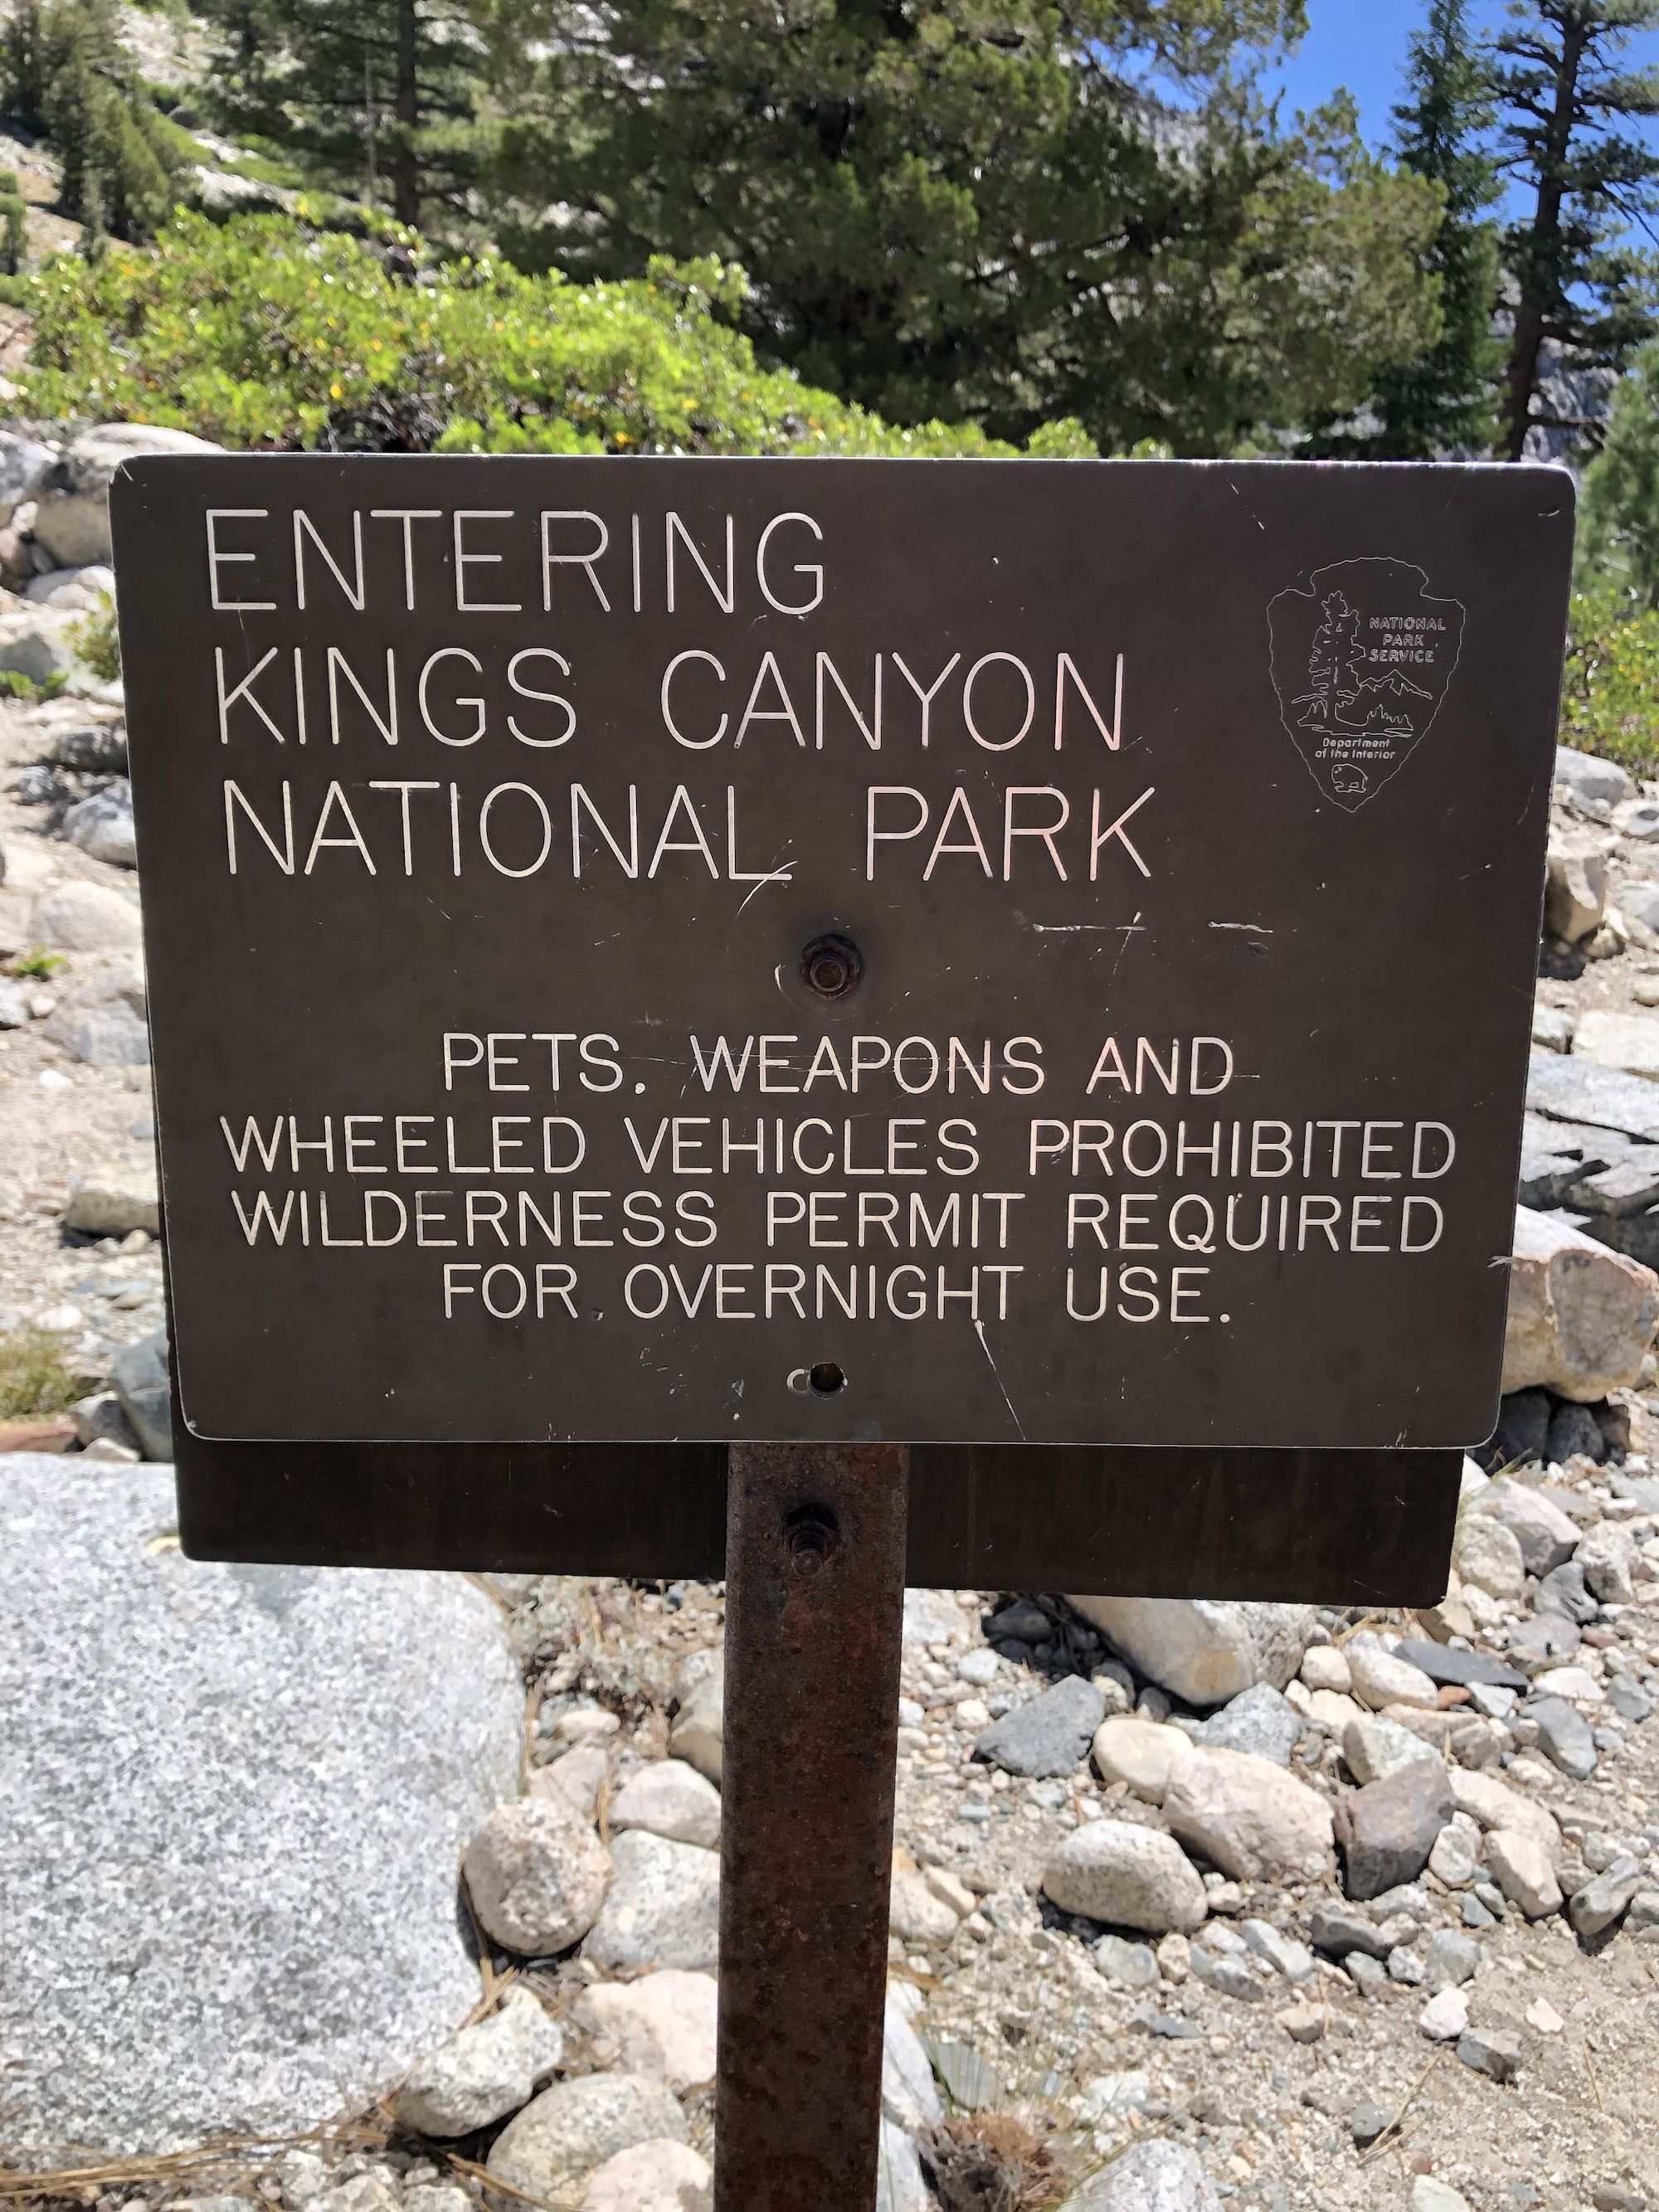 A sign noting that I'm entering Kings Canyon National park